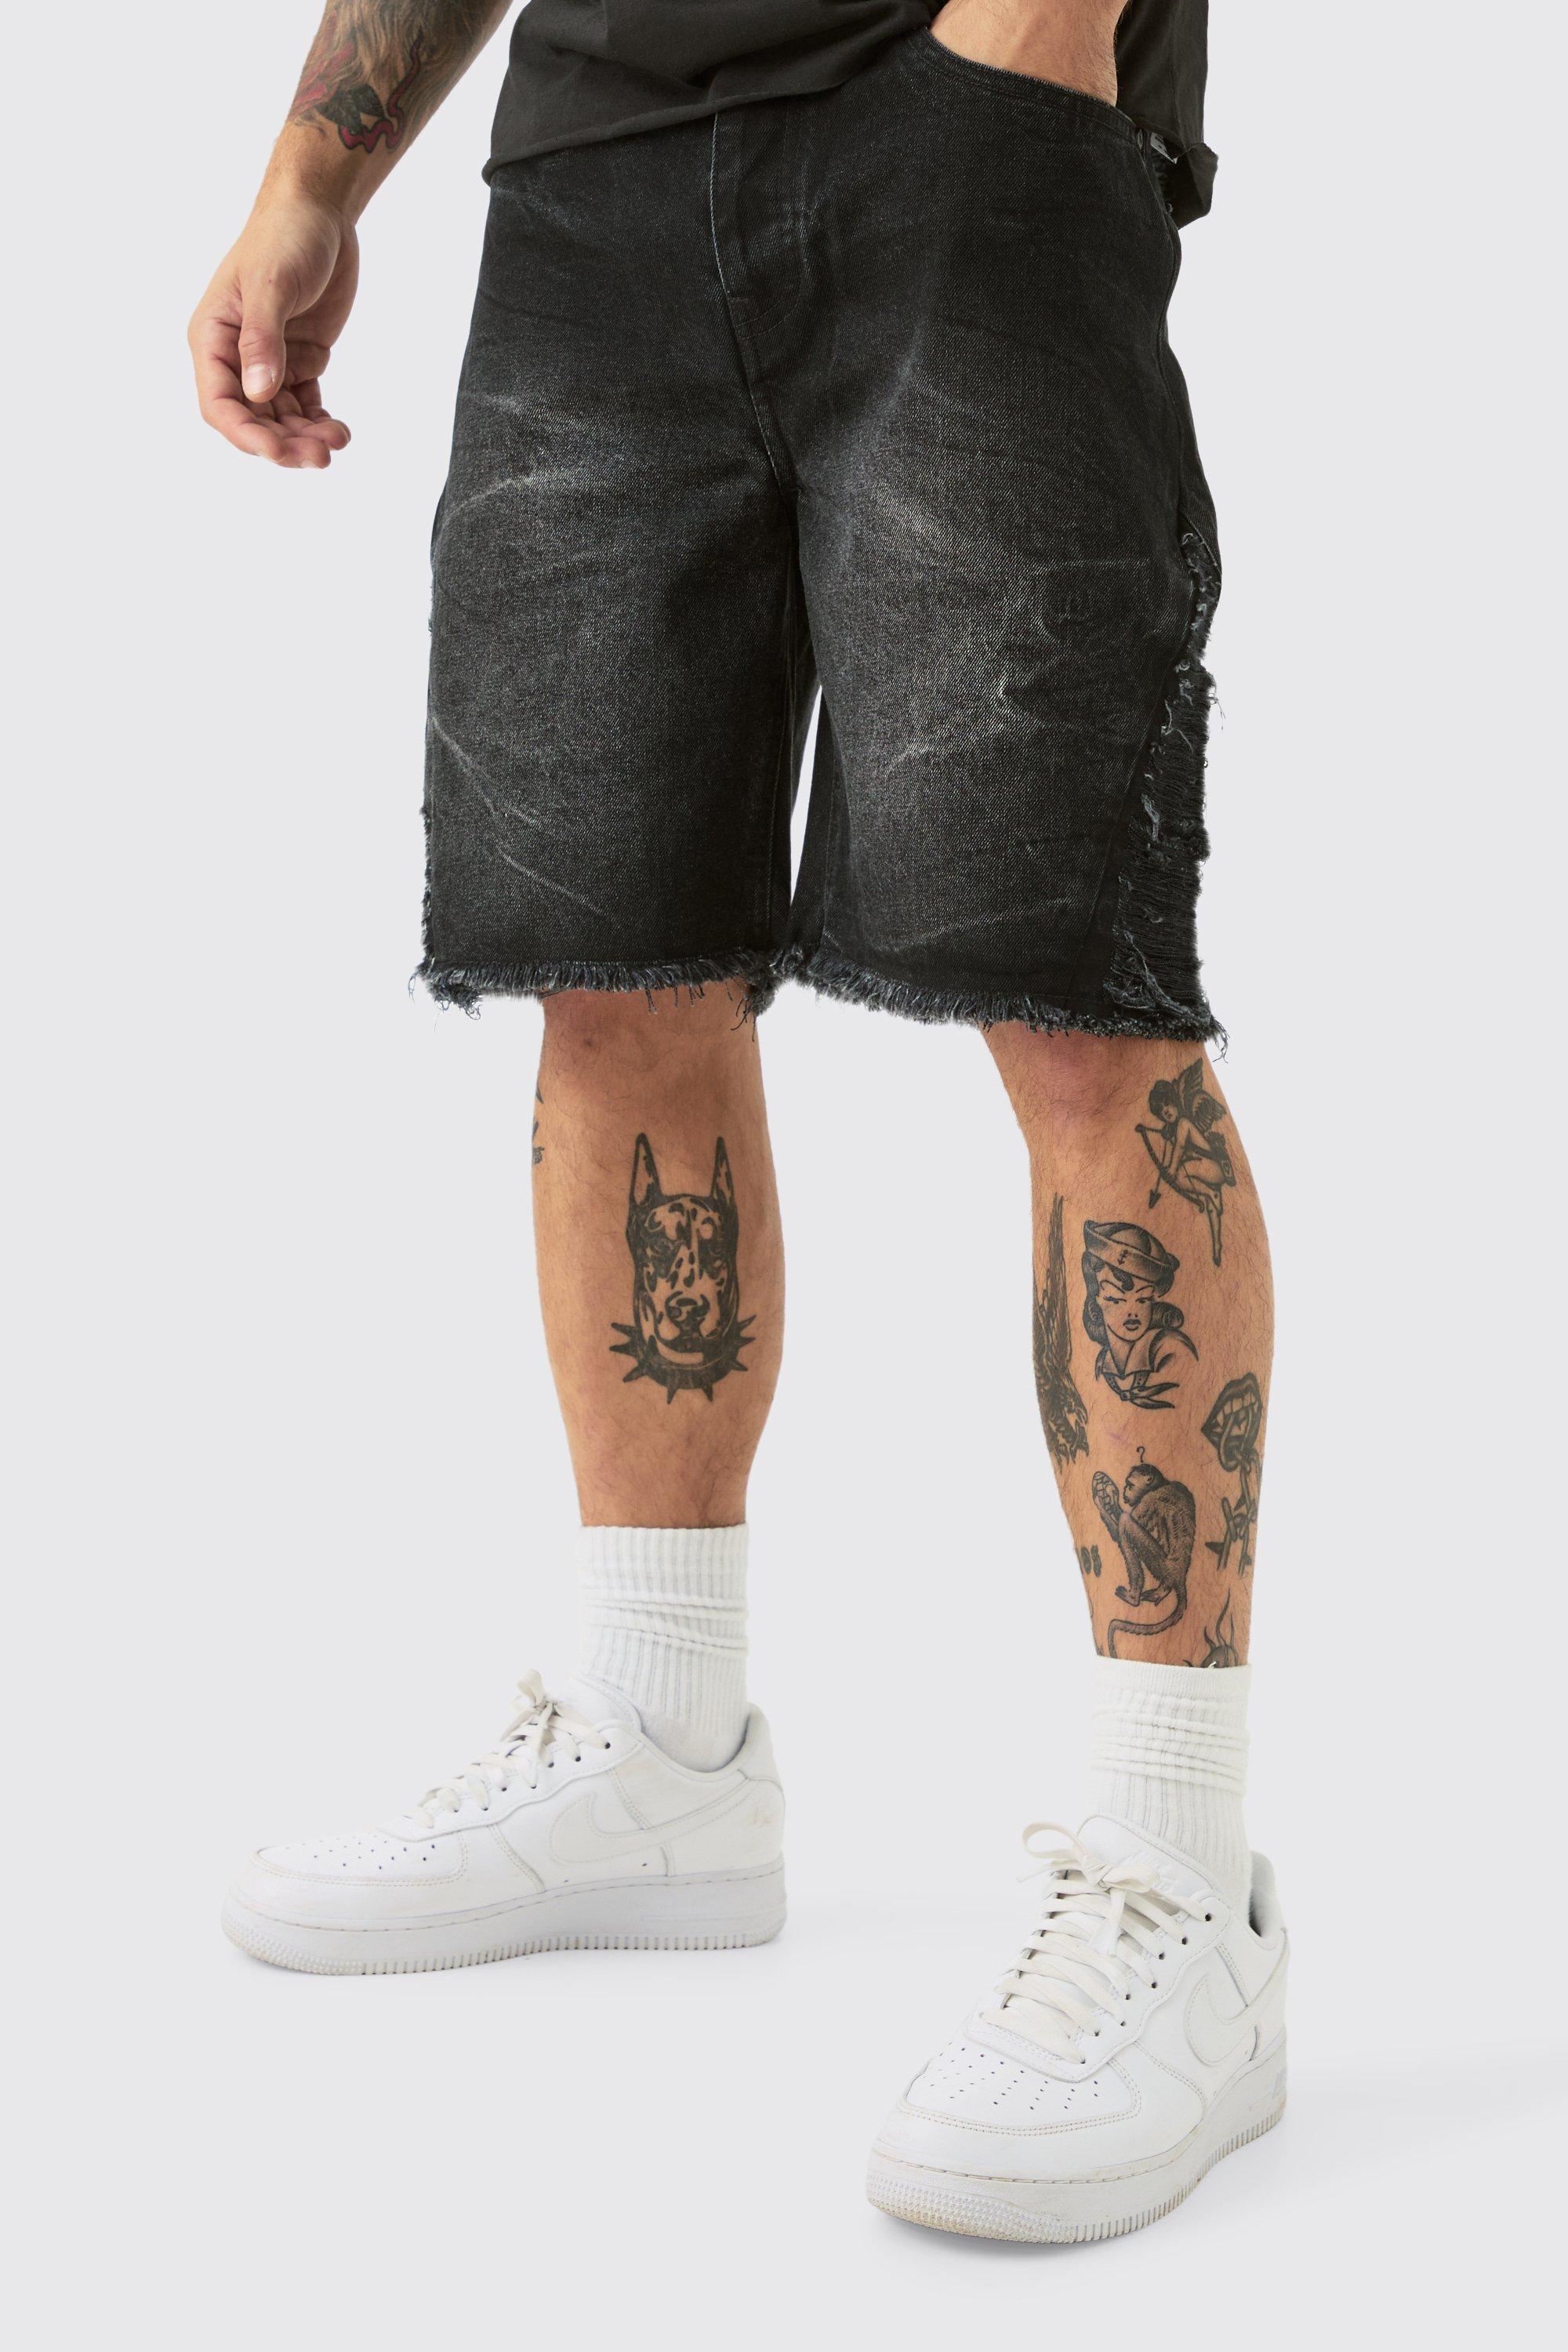 Image of Relaxed Rigid Extreme Side Ripped Denim Short In Washed Black, Nero